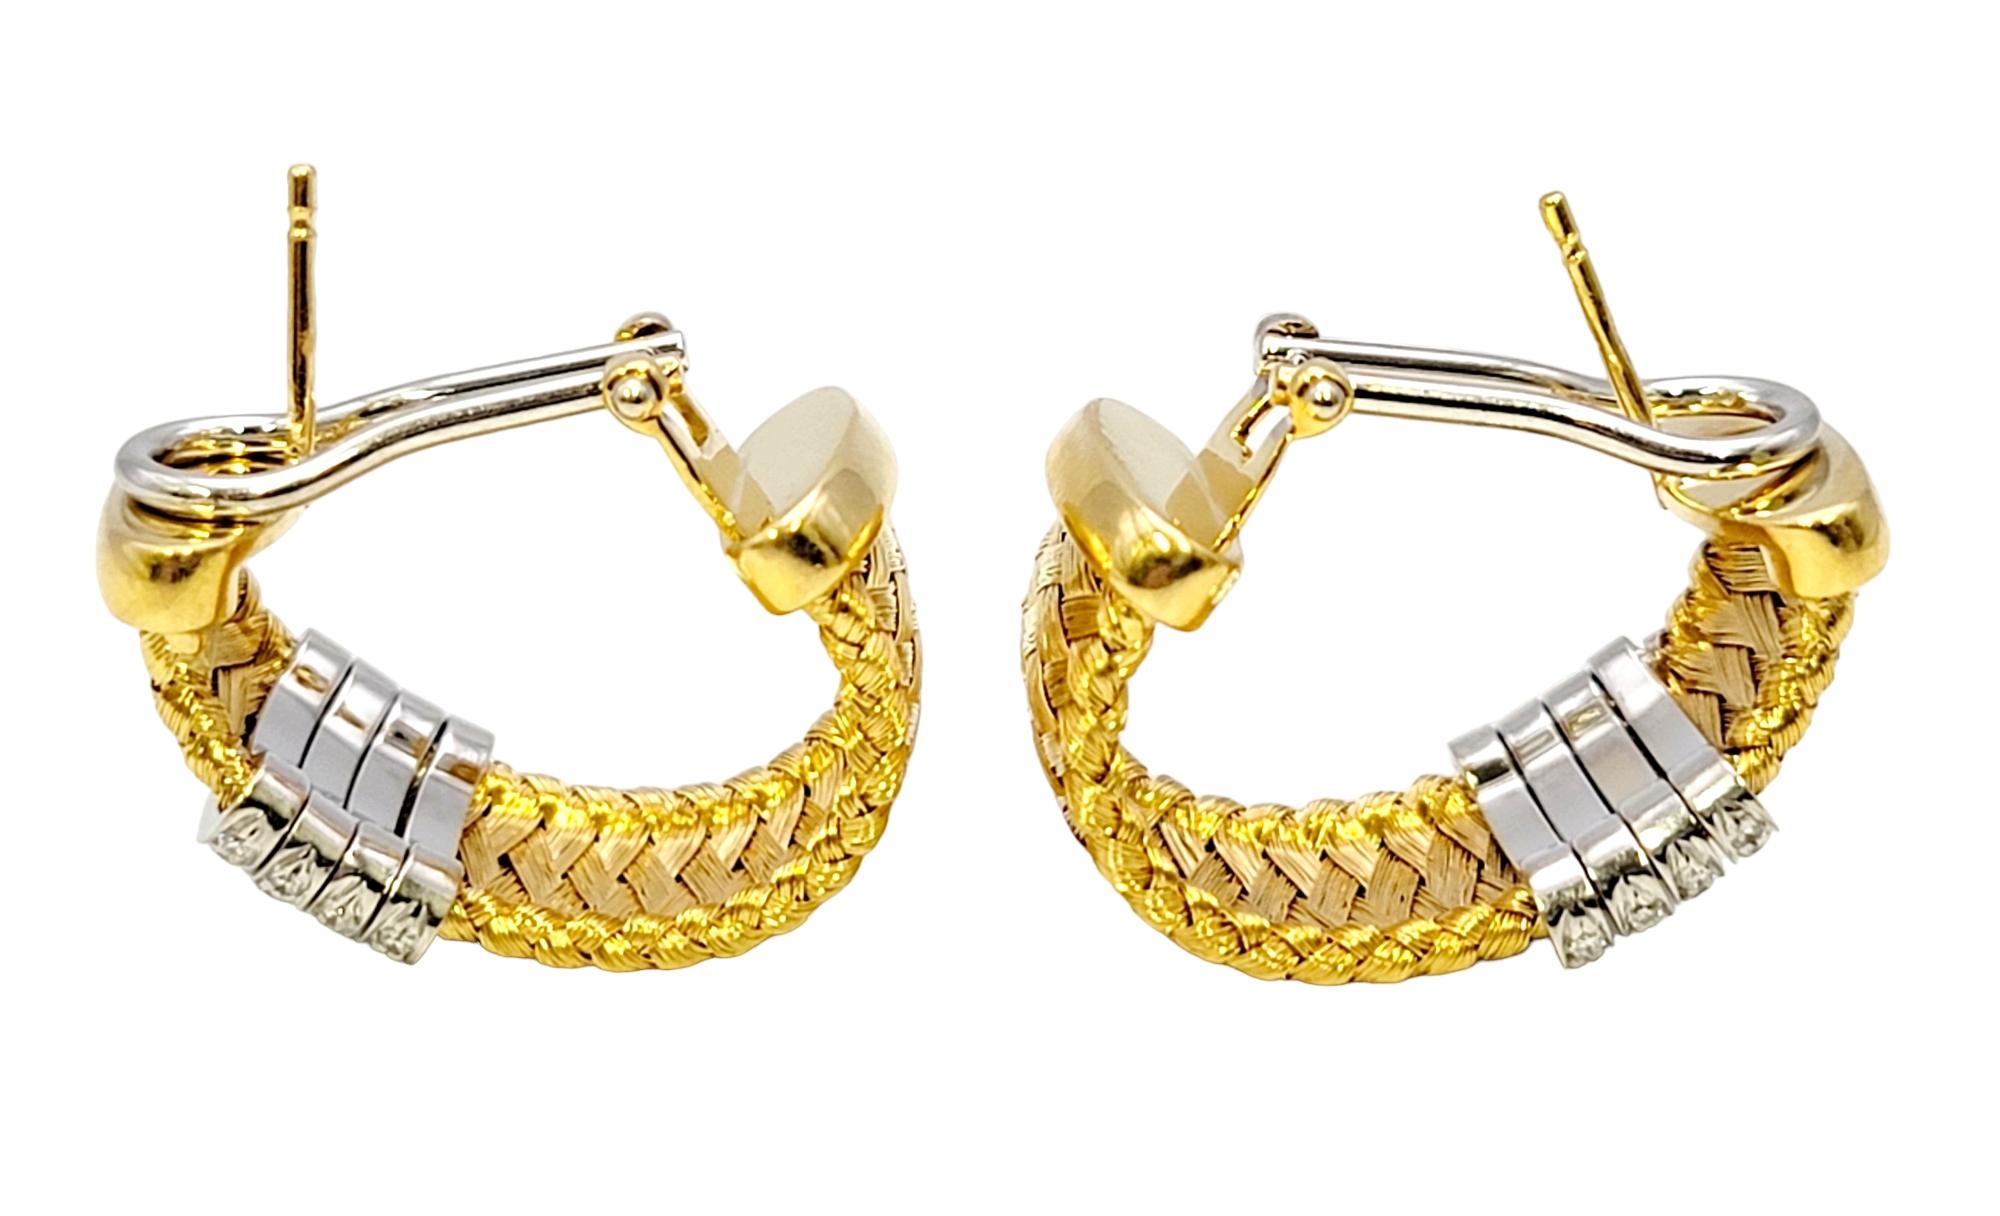 Roberto Coin Woven Mesh 18 Karat Yellow Gold Half Hoop Earrings with Diamonds In Good Condition For Sale In Scottsdale, AZ